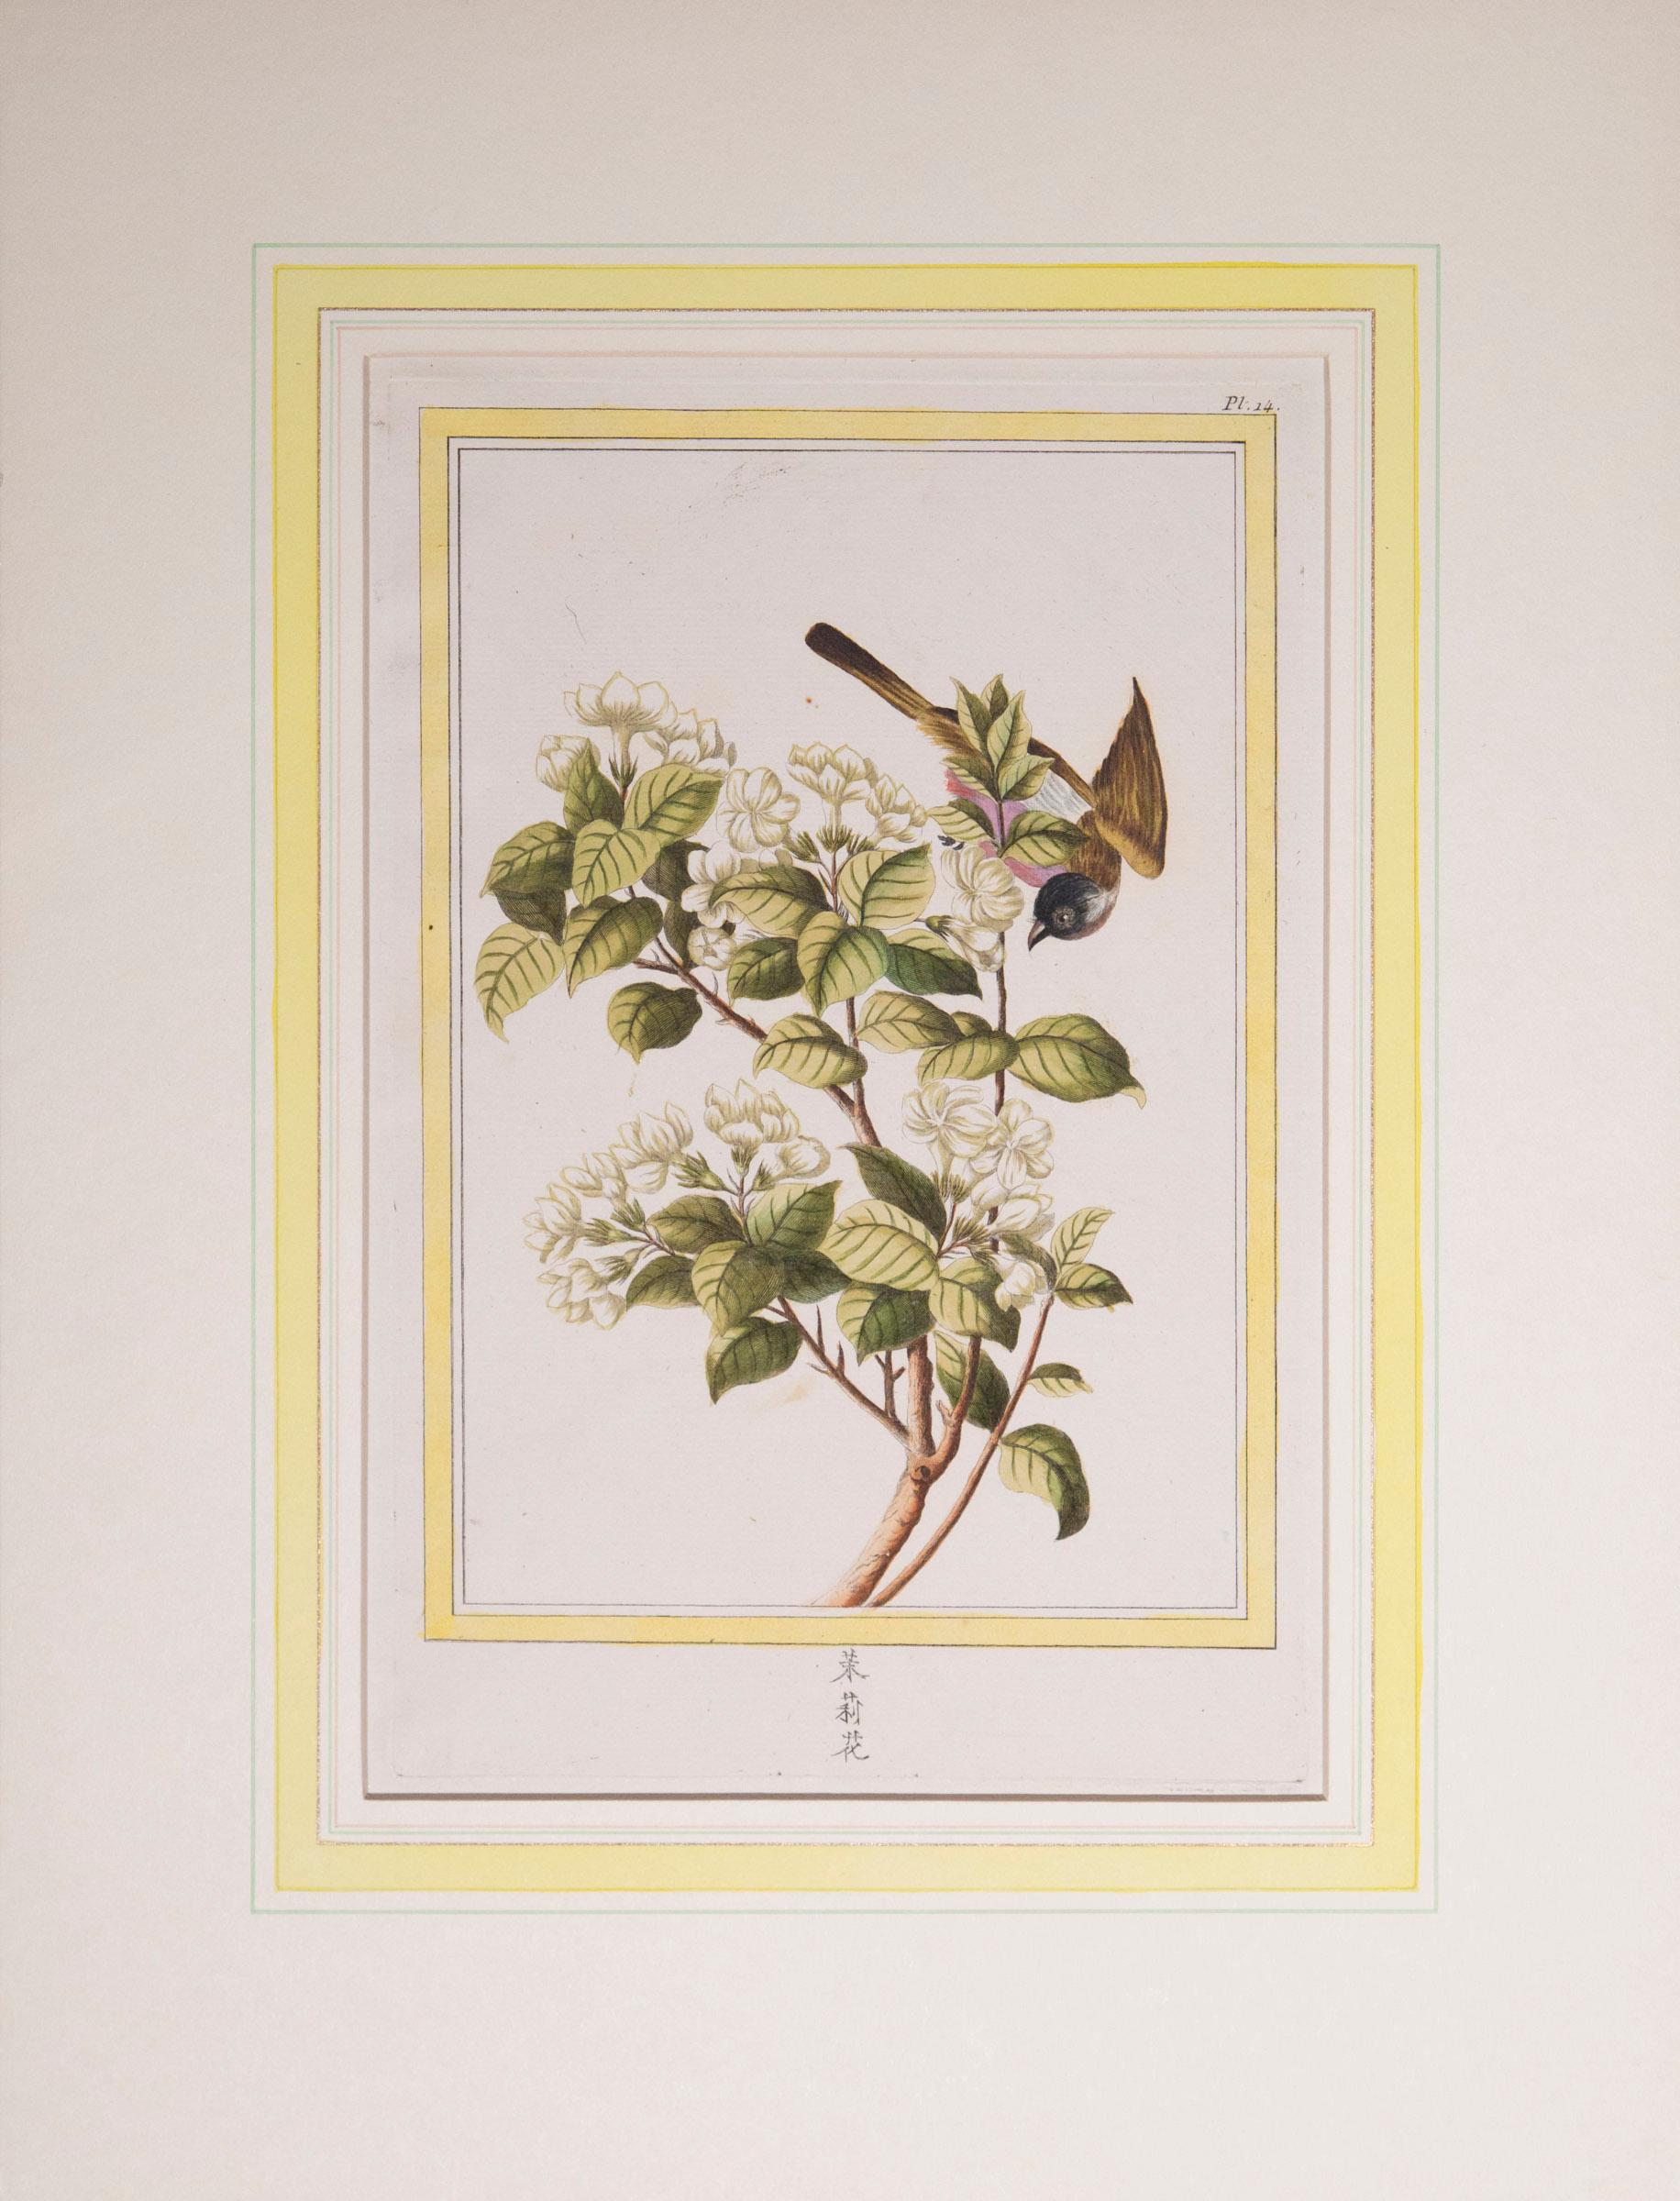 Set of Six 18th Century Hand-Colored Botanical Prints, P.J. Buchoz, 1776 In Good Condition For Sale In Richmond, London